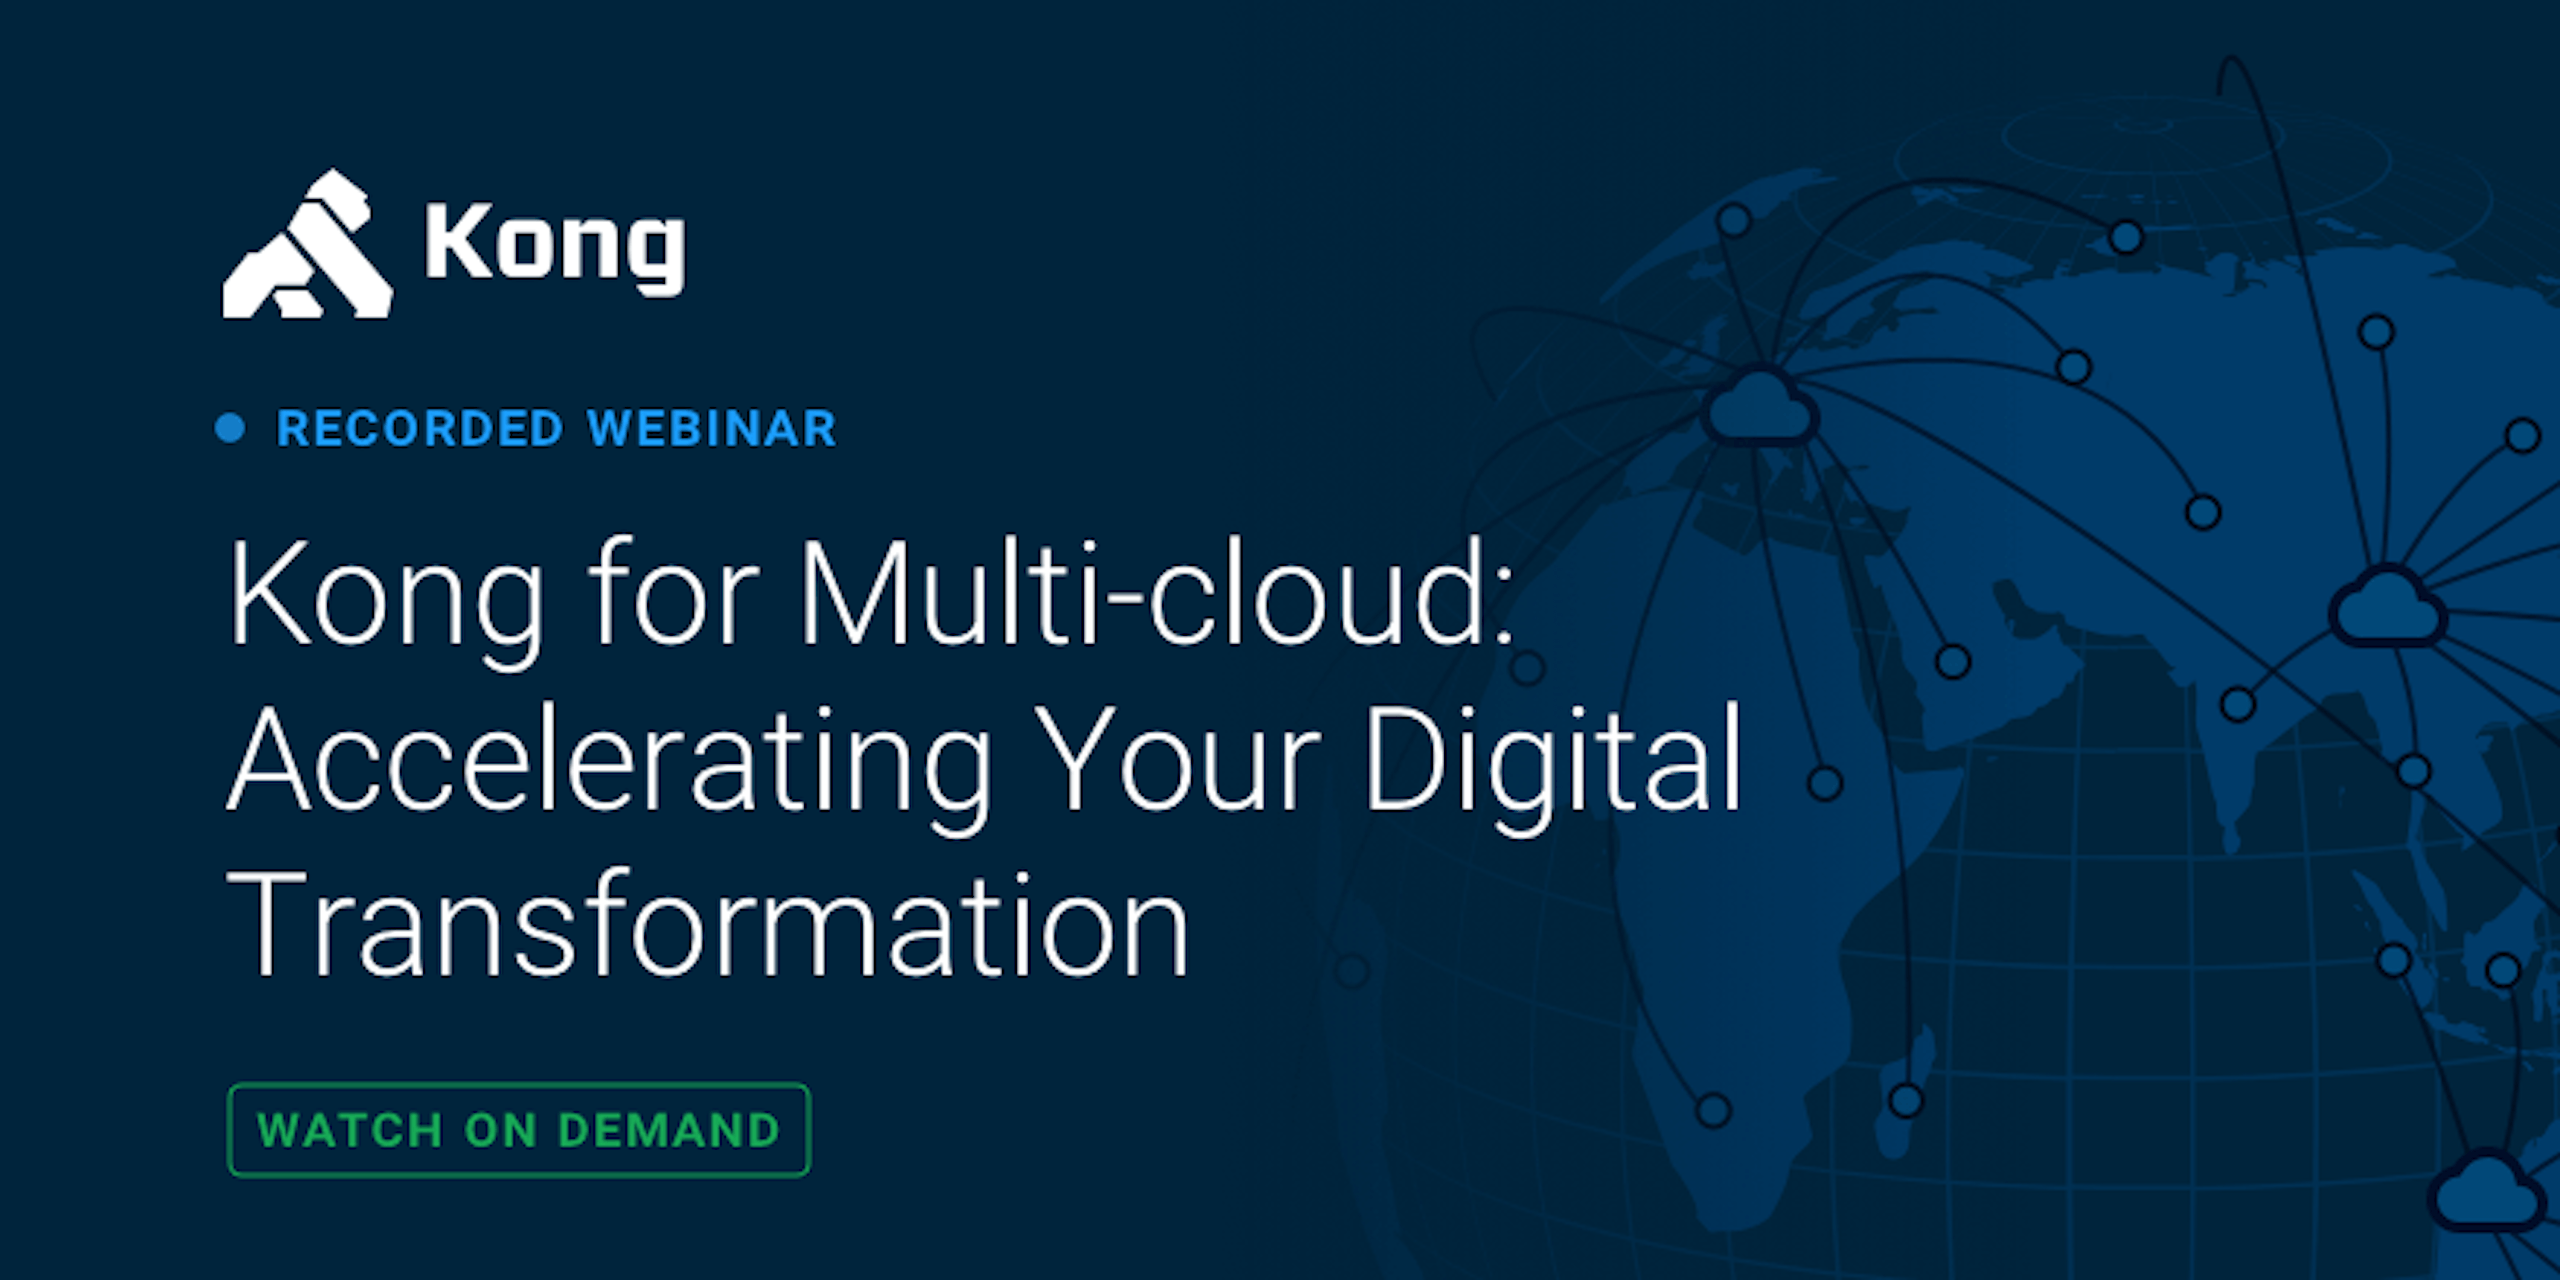 Kong for Multi-cloud: Accelerating Your Digital Transformation